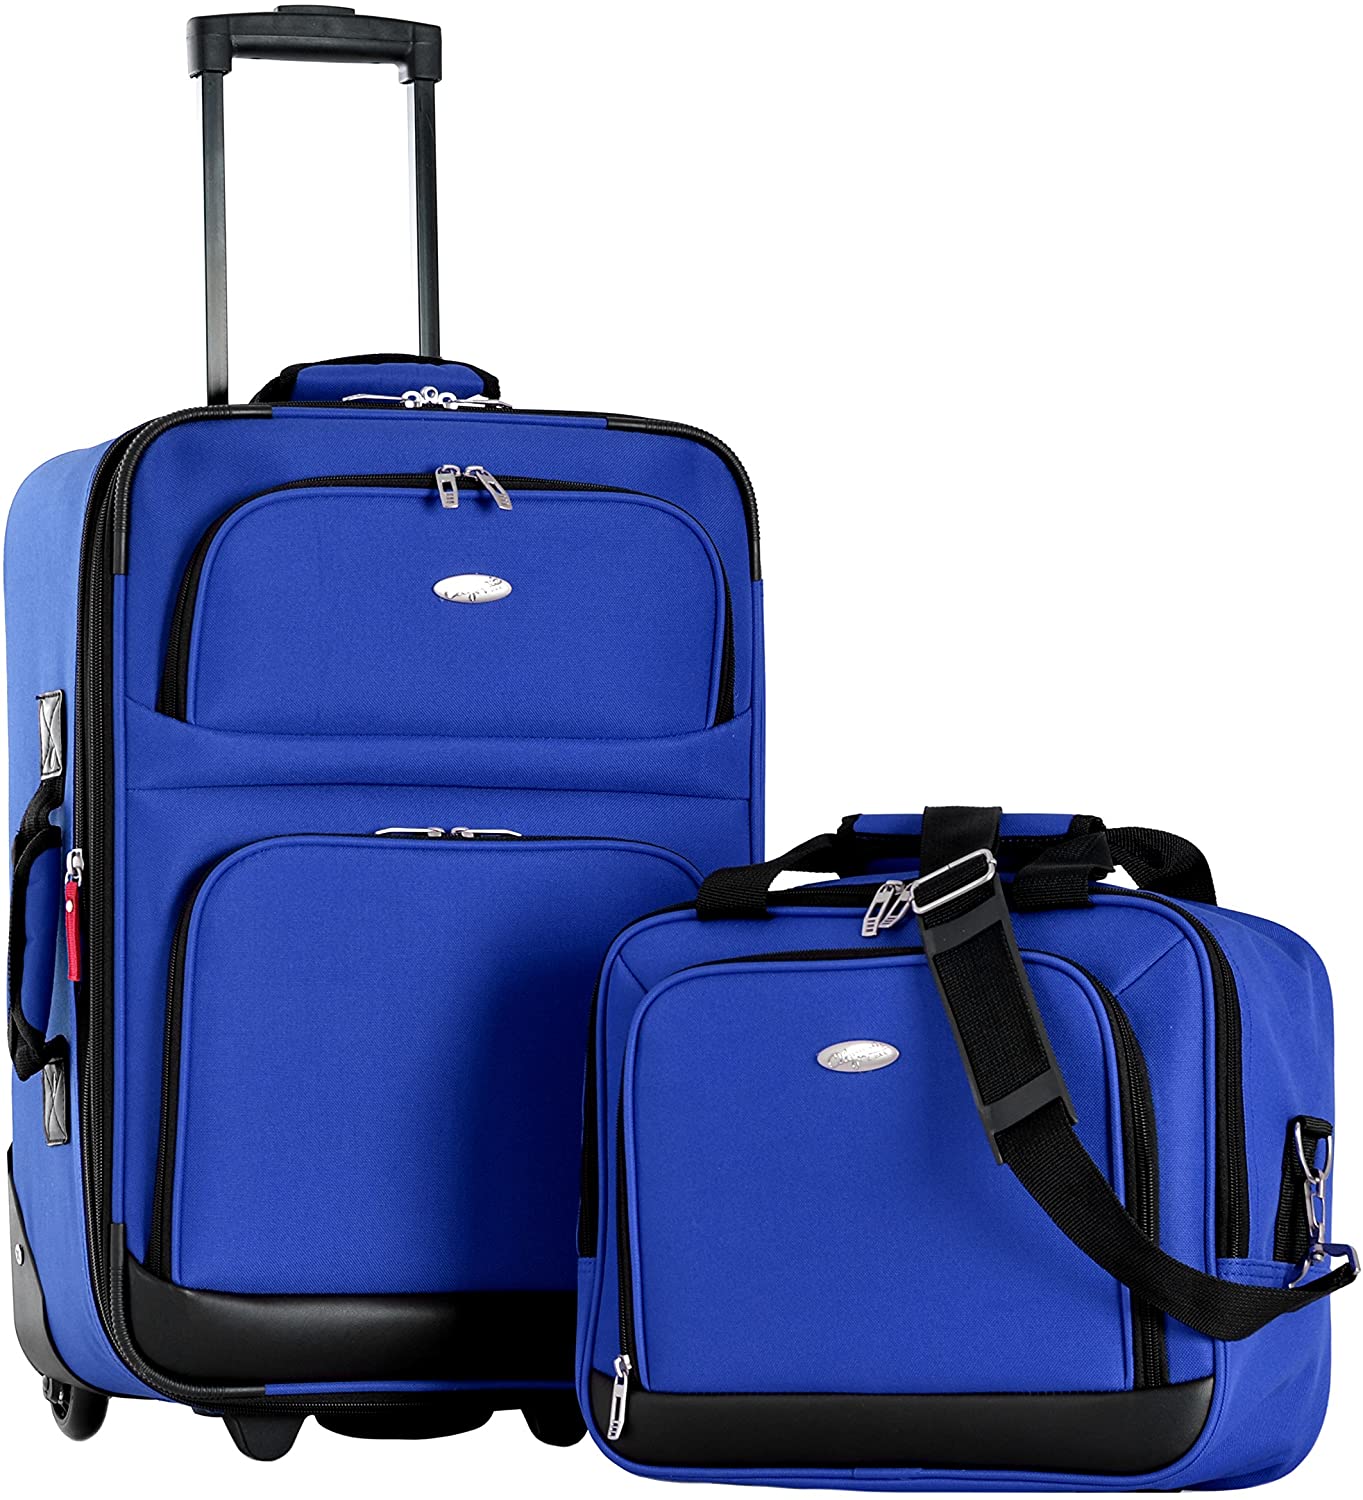 Olympia USA Luggage: Review & Rating - Luggage & Travel